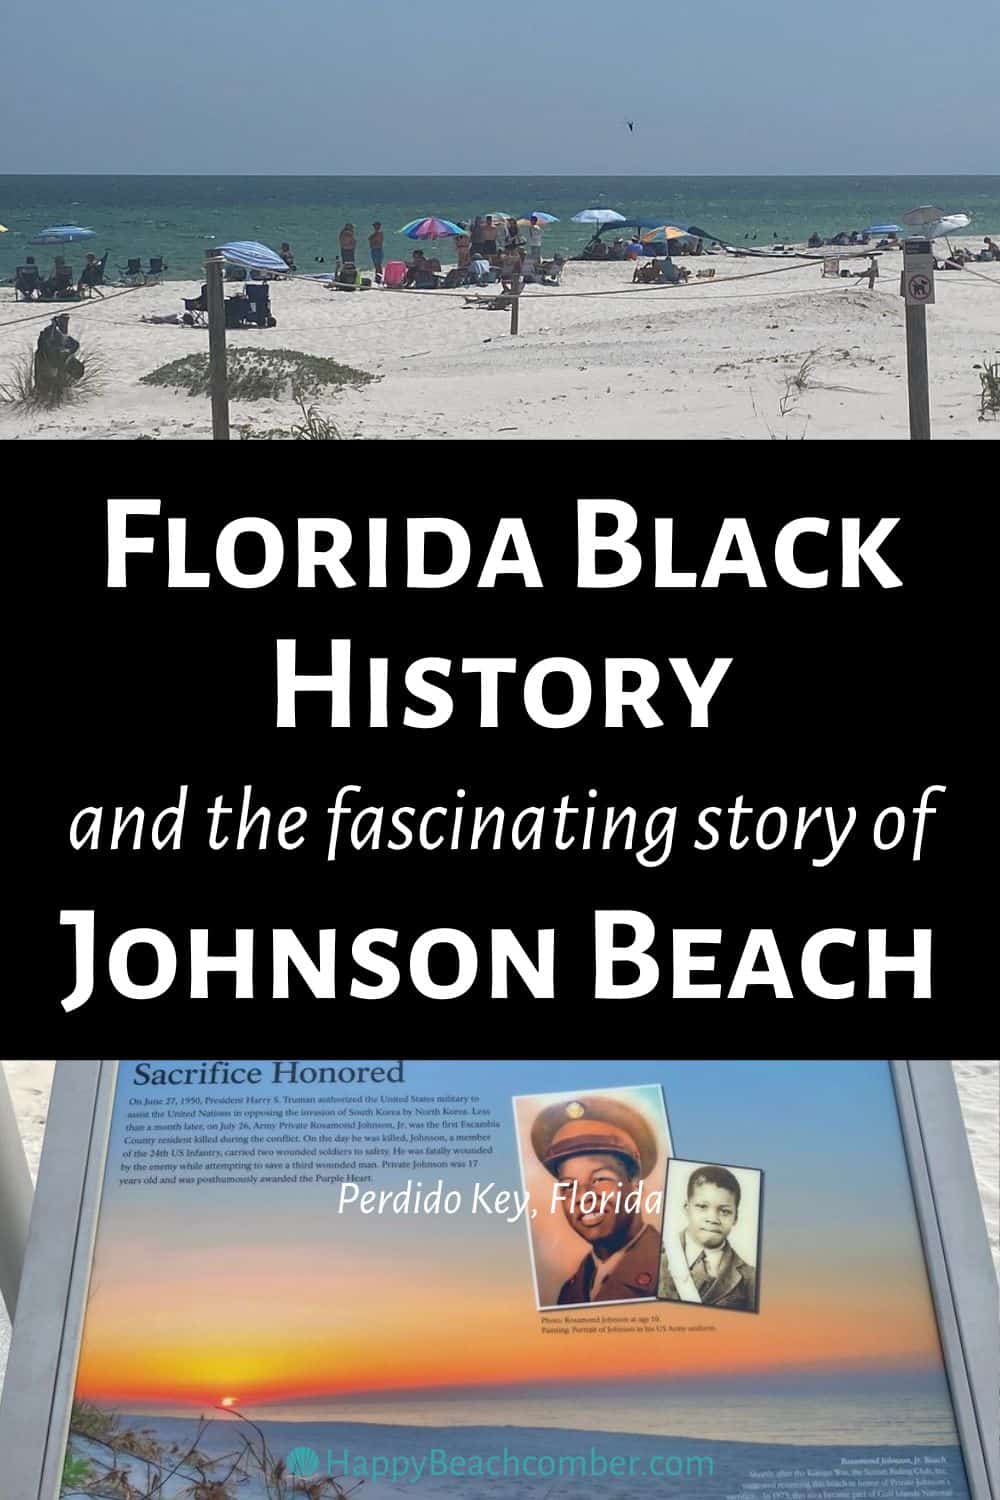 Florida Black History and the fascinating story of Johnson Beach